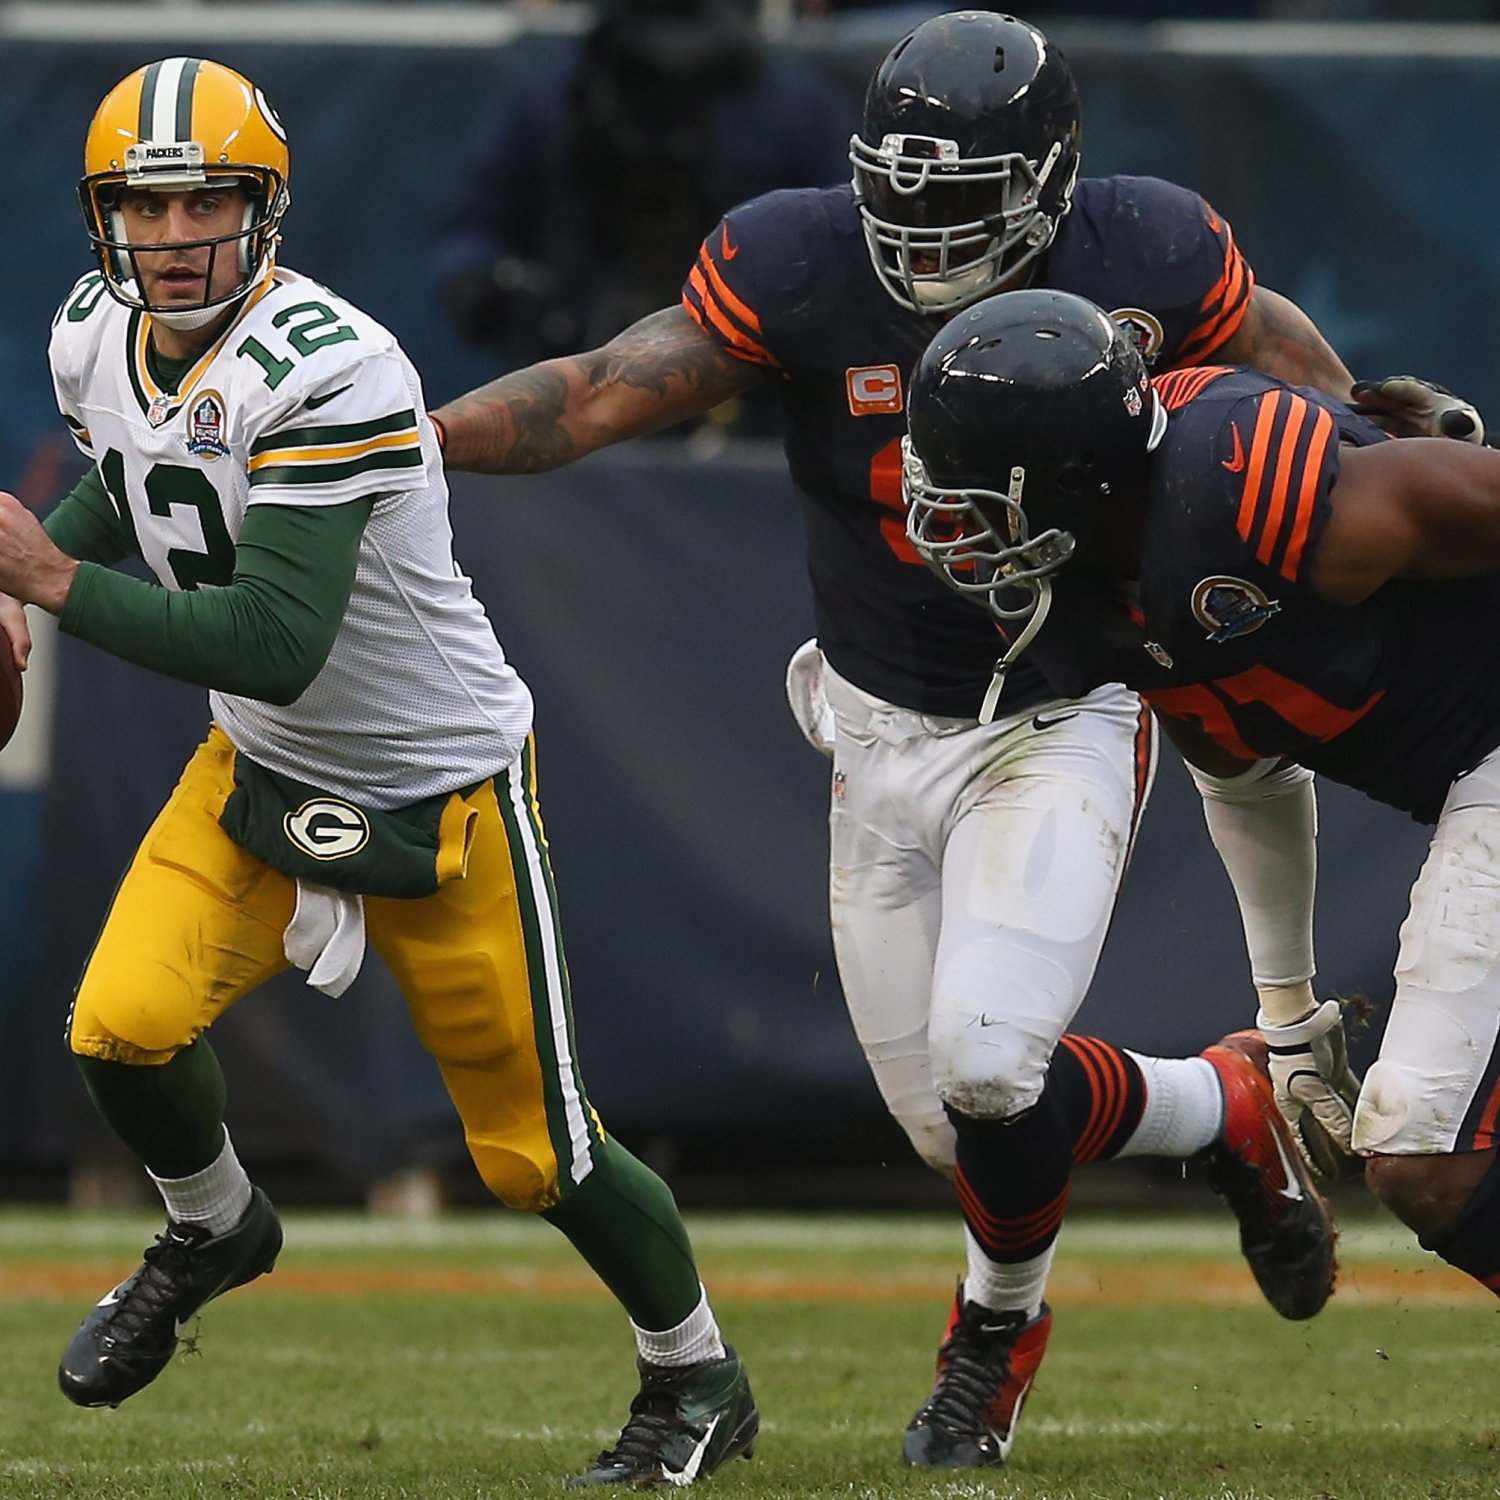 Chicago Bears vs. Green Bay Packers Spread Analysis and Pick